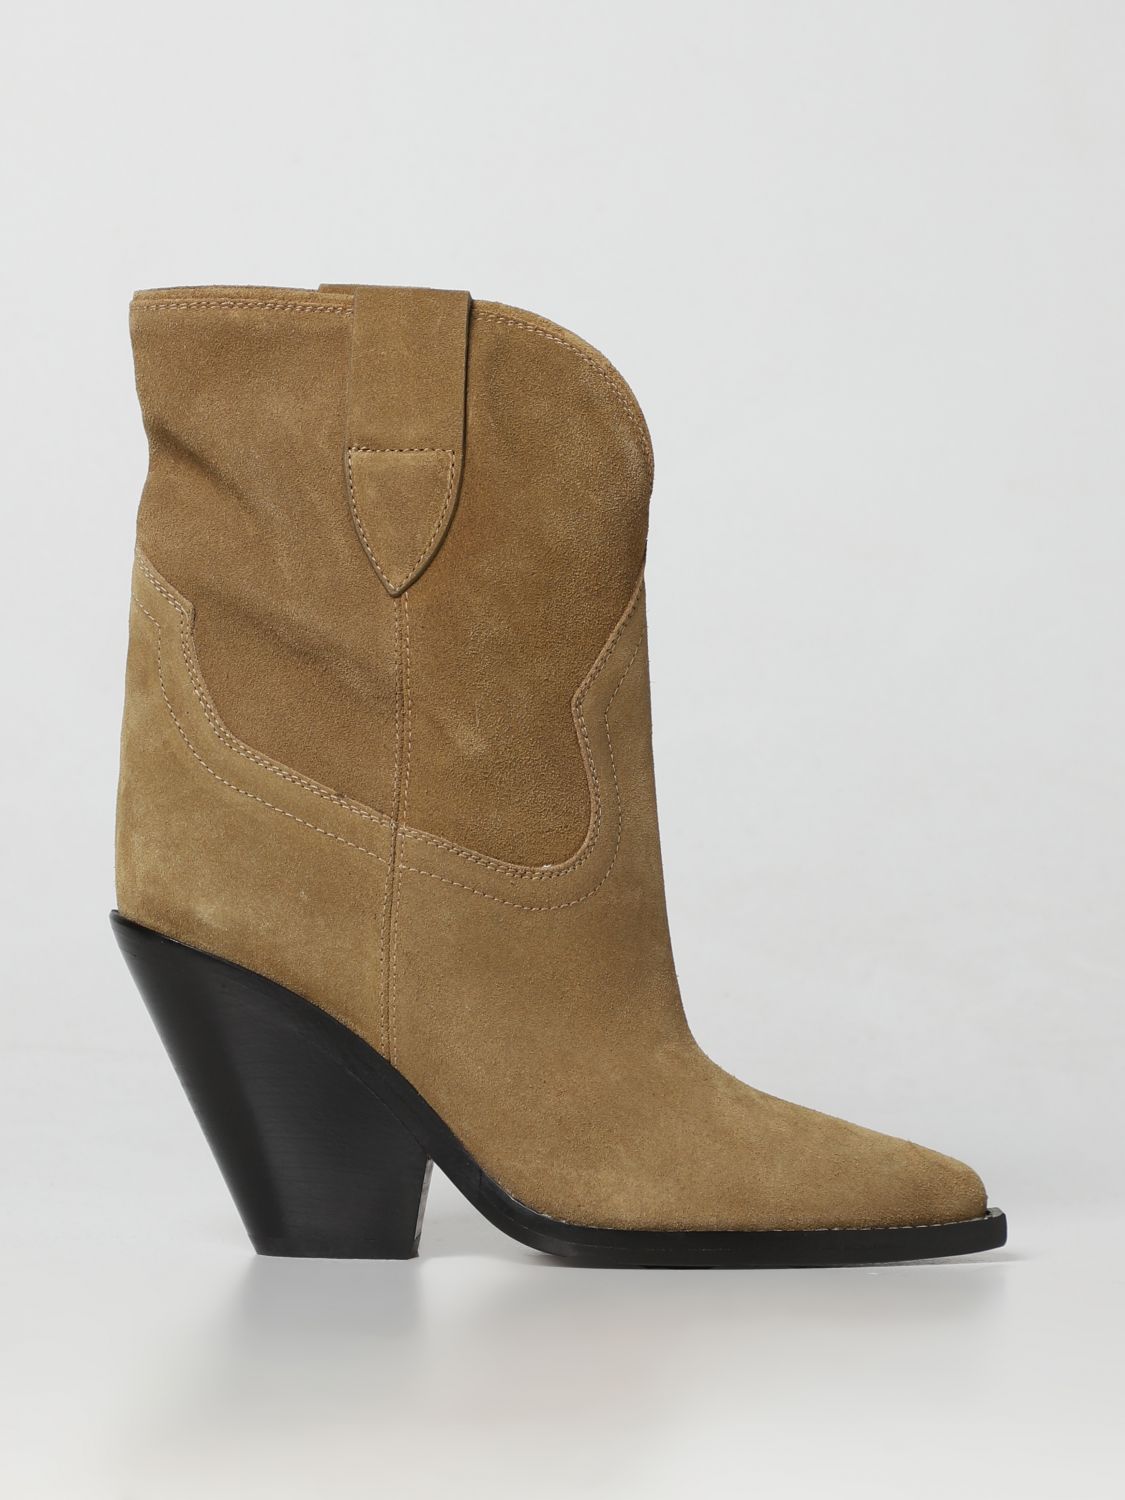 ISABEL MARANT: boots for woman - Blush Pink | Isabel Marant boots BO0004FAA1A07S online on